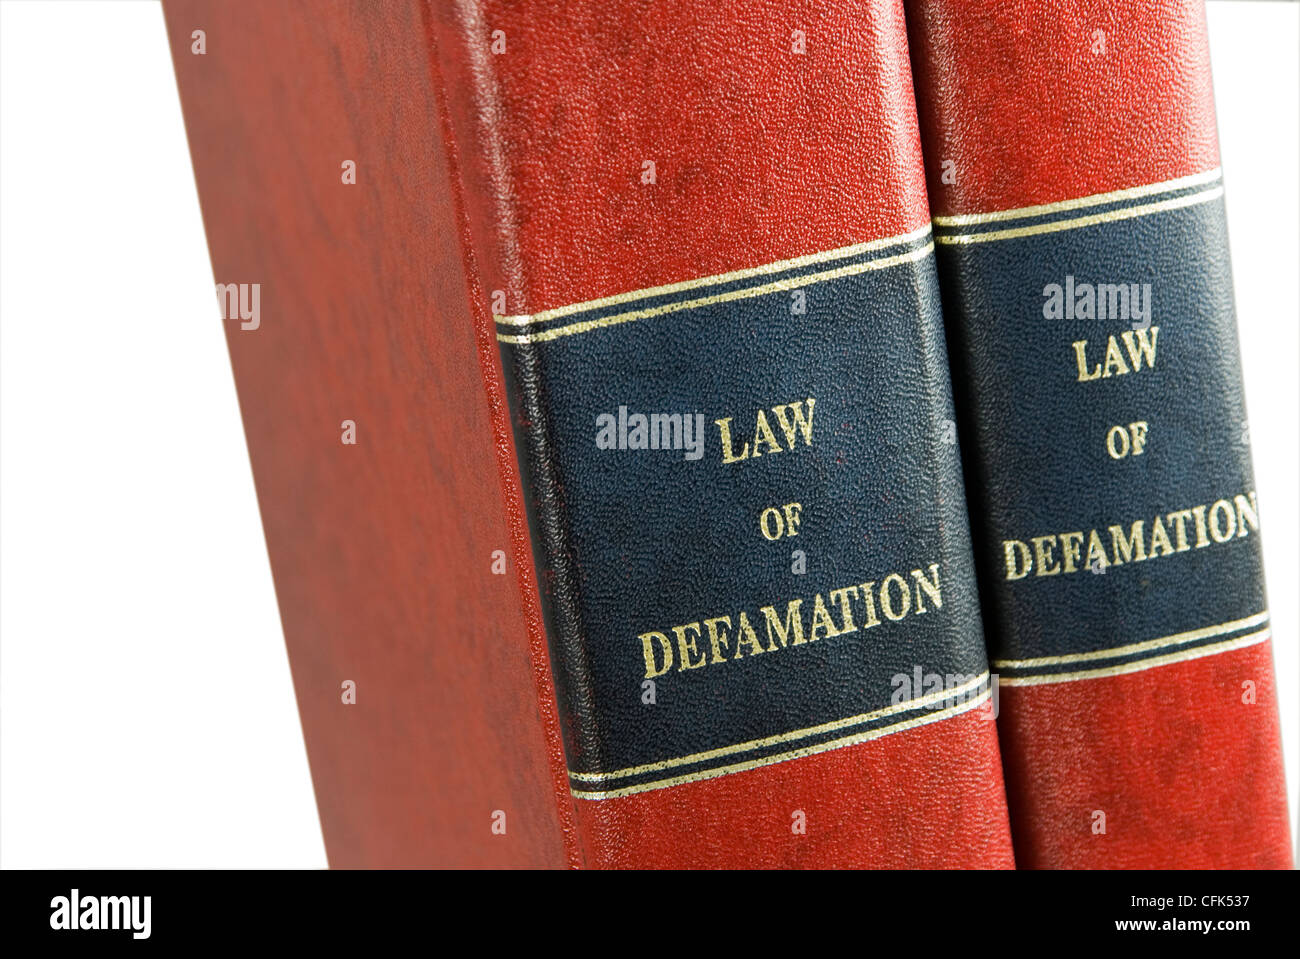 Law of Defamation legal books Stock Photo - Alamy